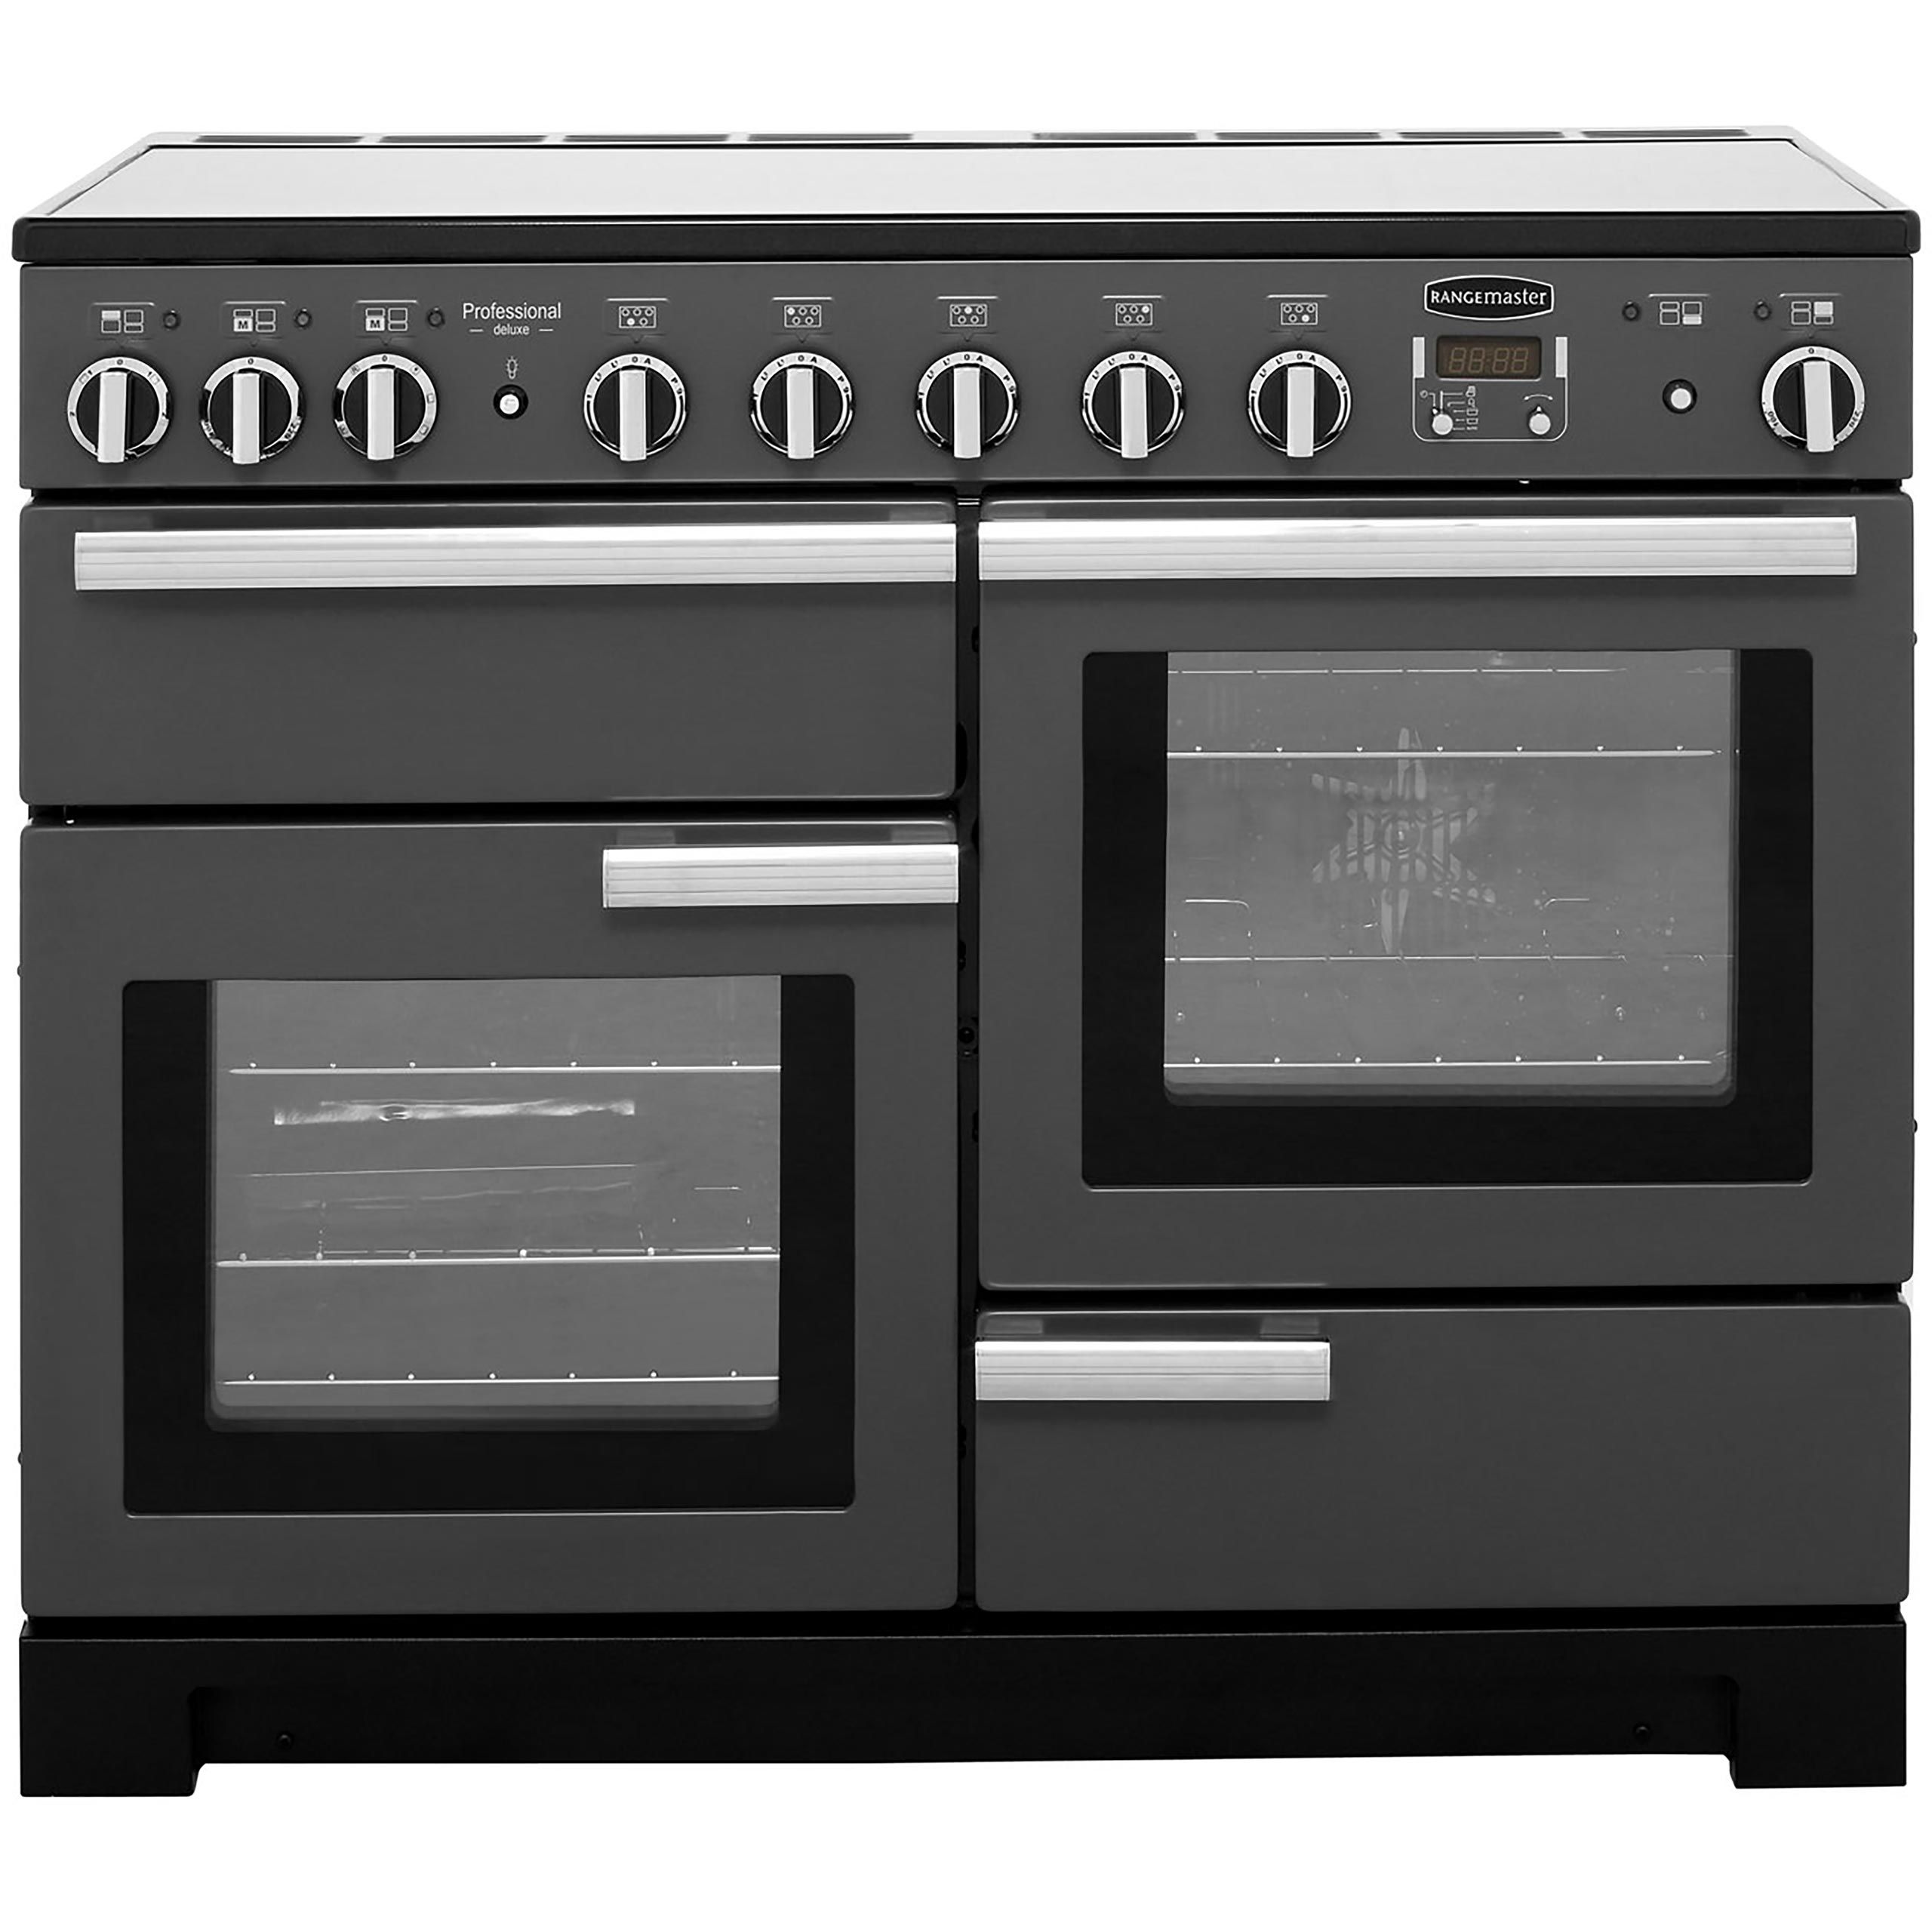 Rangemaster Professional Deluxe PDL110EISL/C 110cm Electric Range Cooker with Induction Hob - Slate / Chrome - A/A Rated, Grey